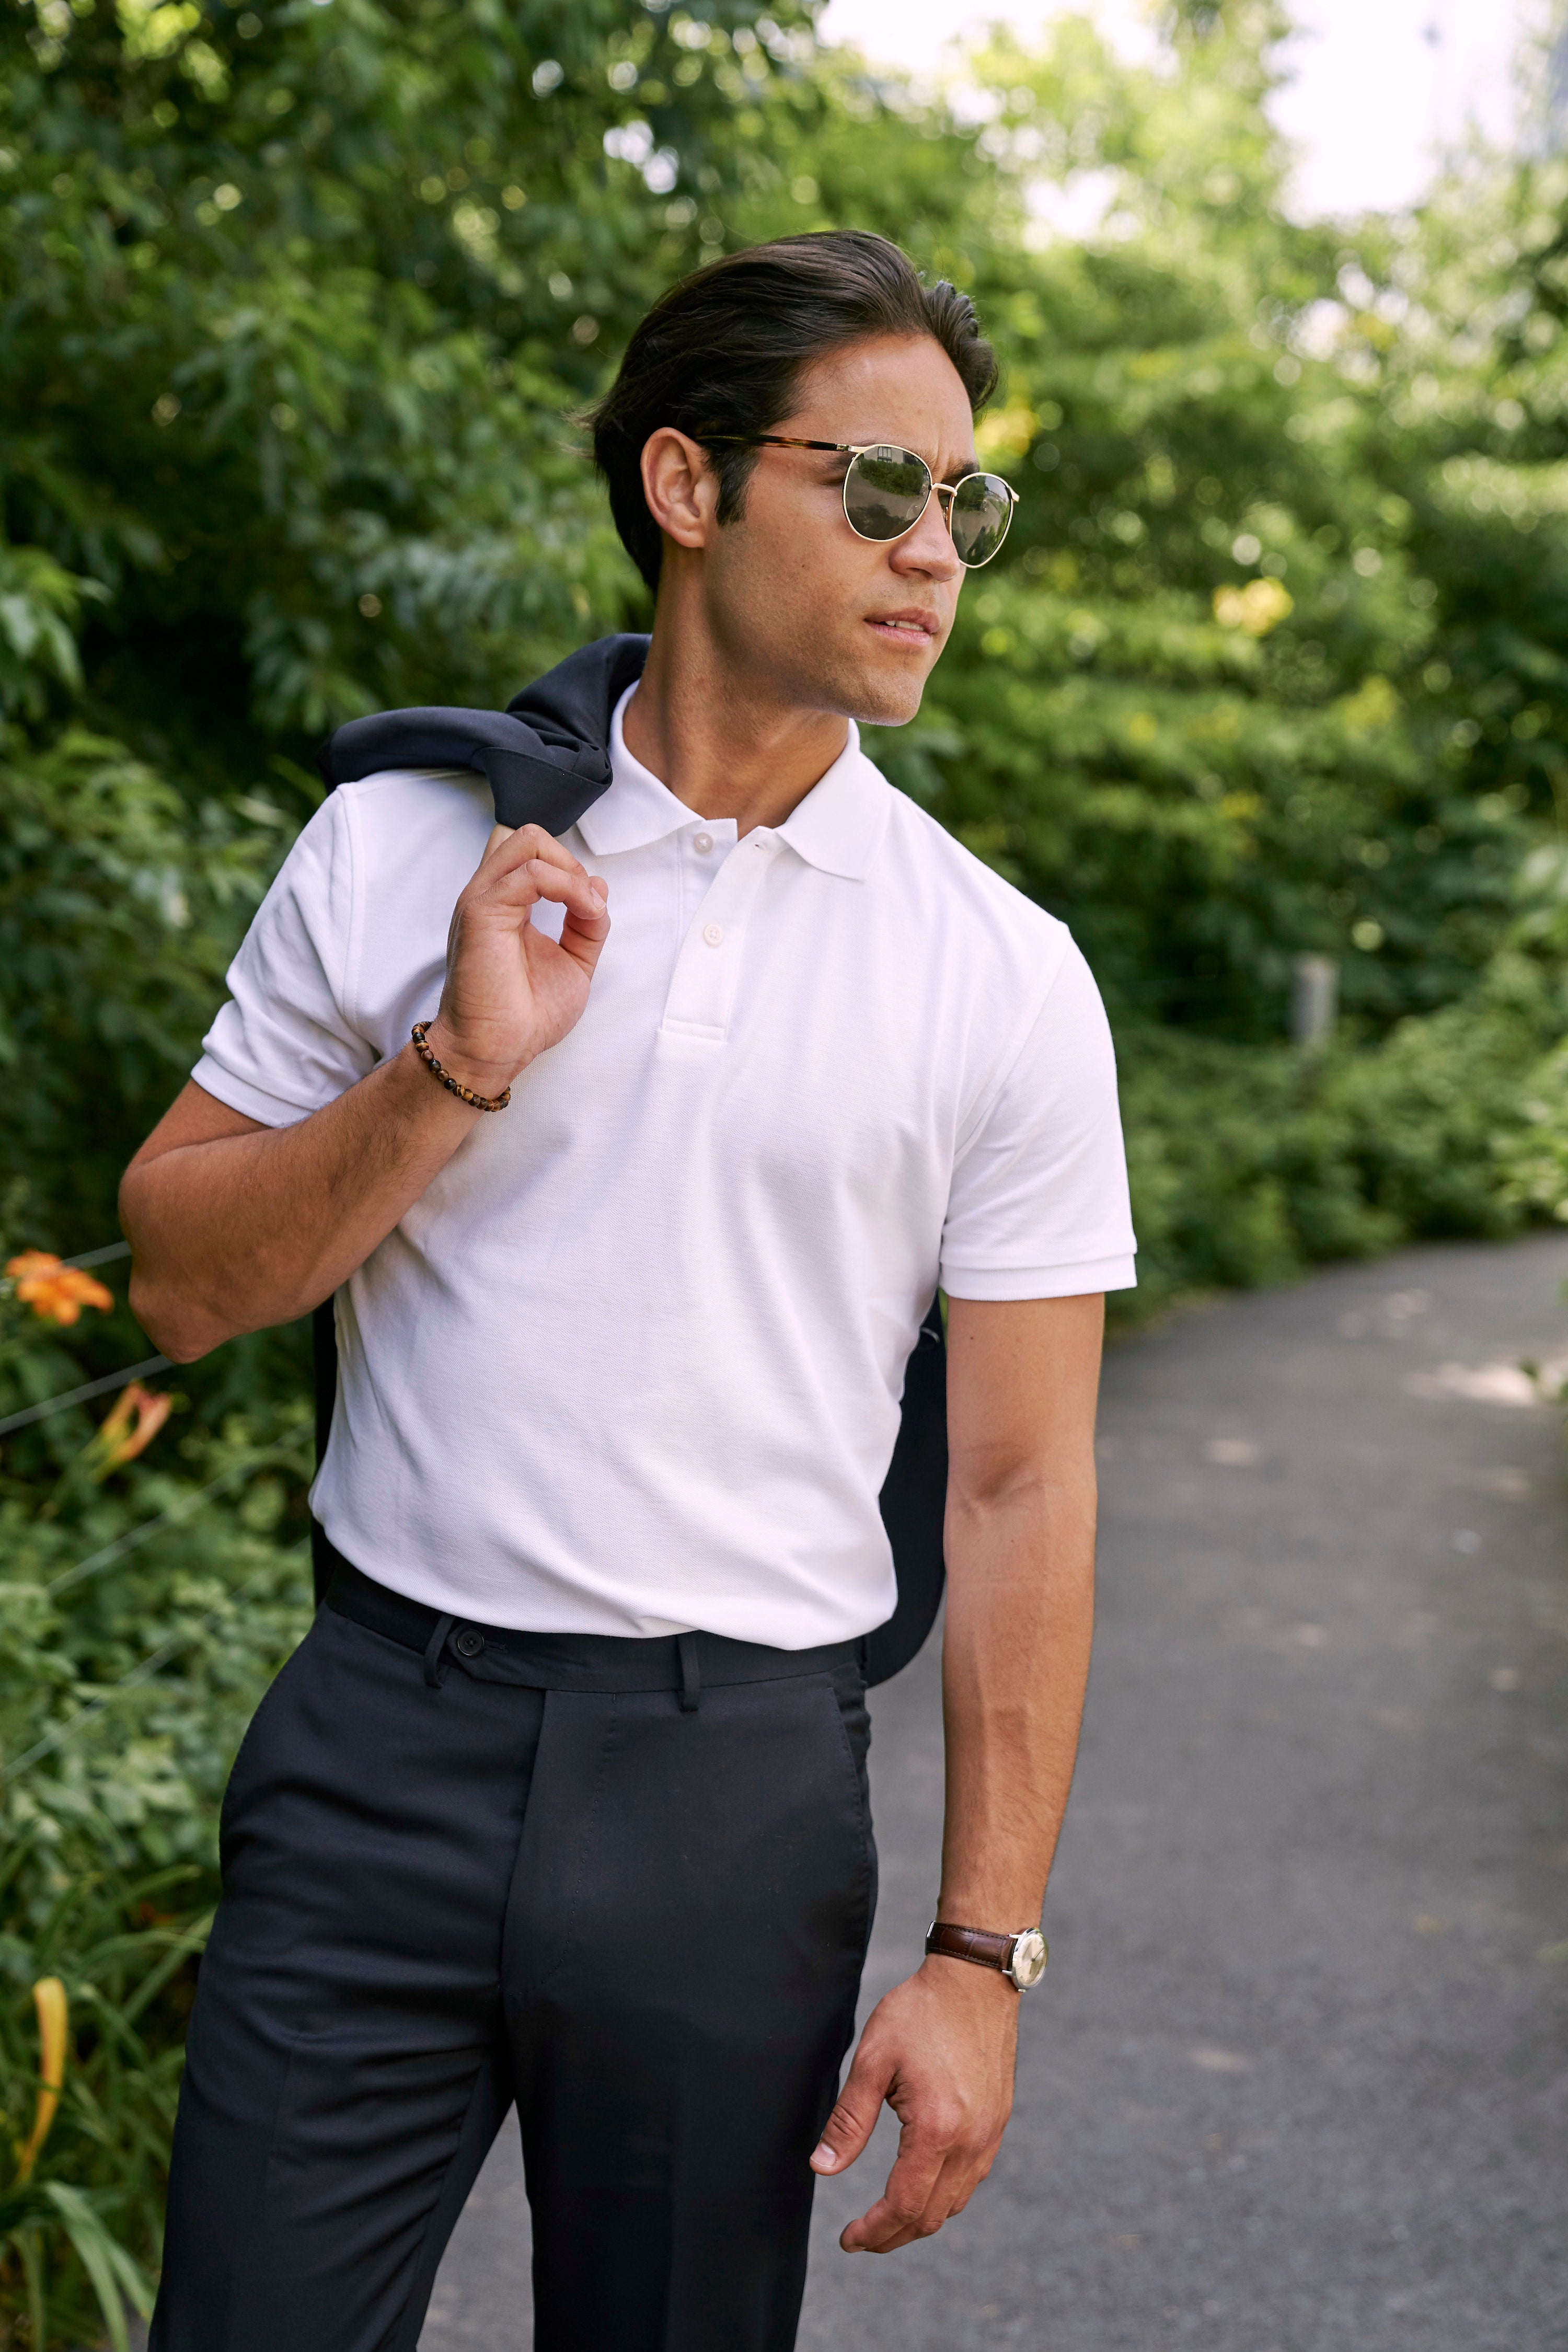 Polo shirt with suit